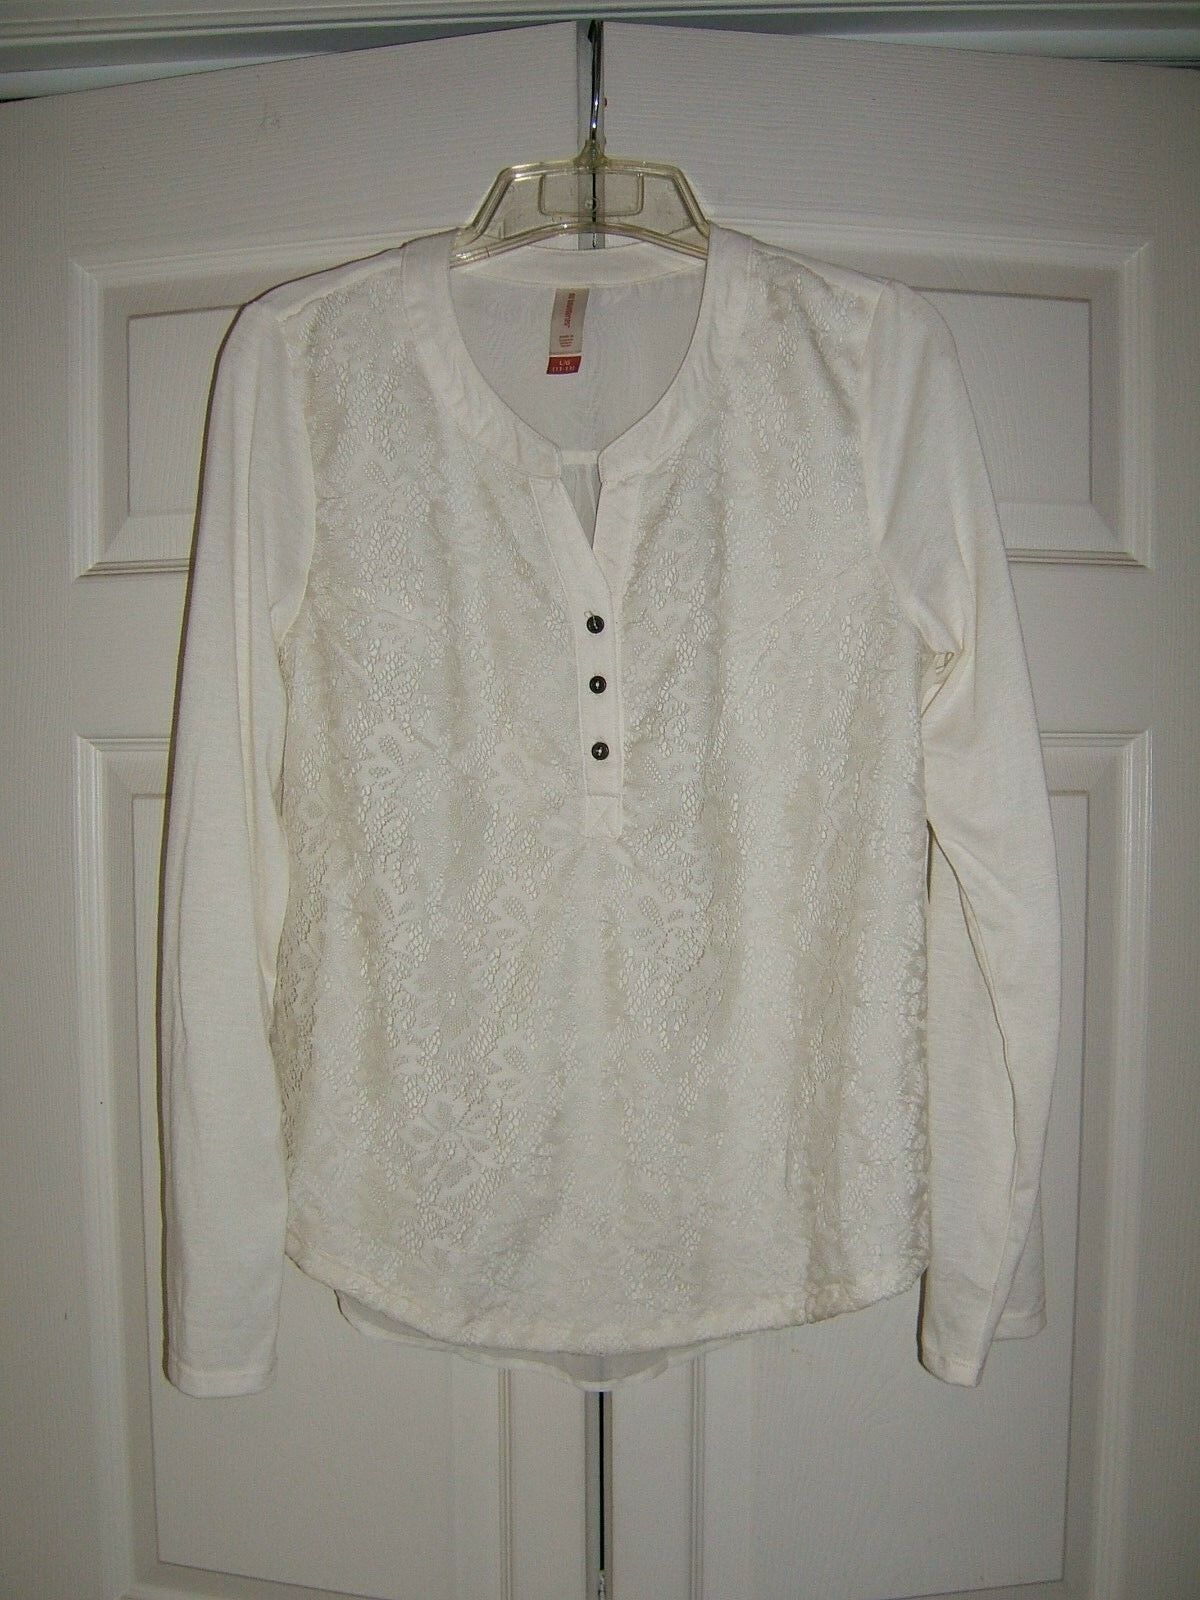 Primary image for Women's No Boundaries Lace Sheer Blouse Top-Size Ladies Large 11-13